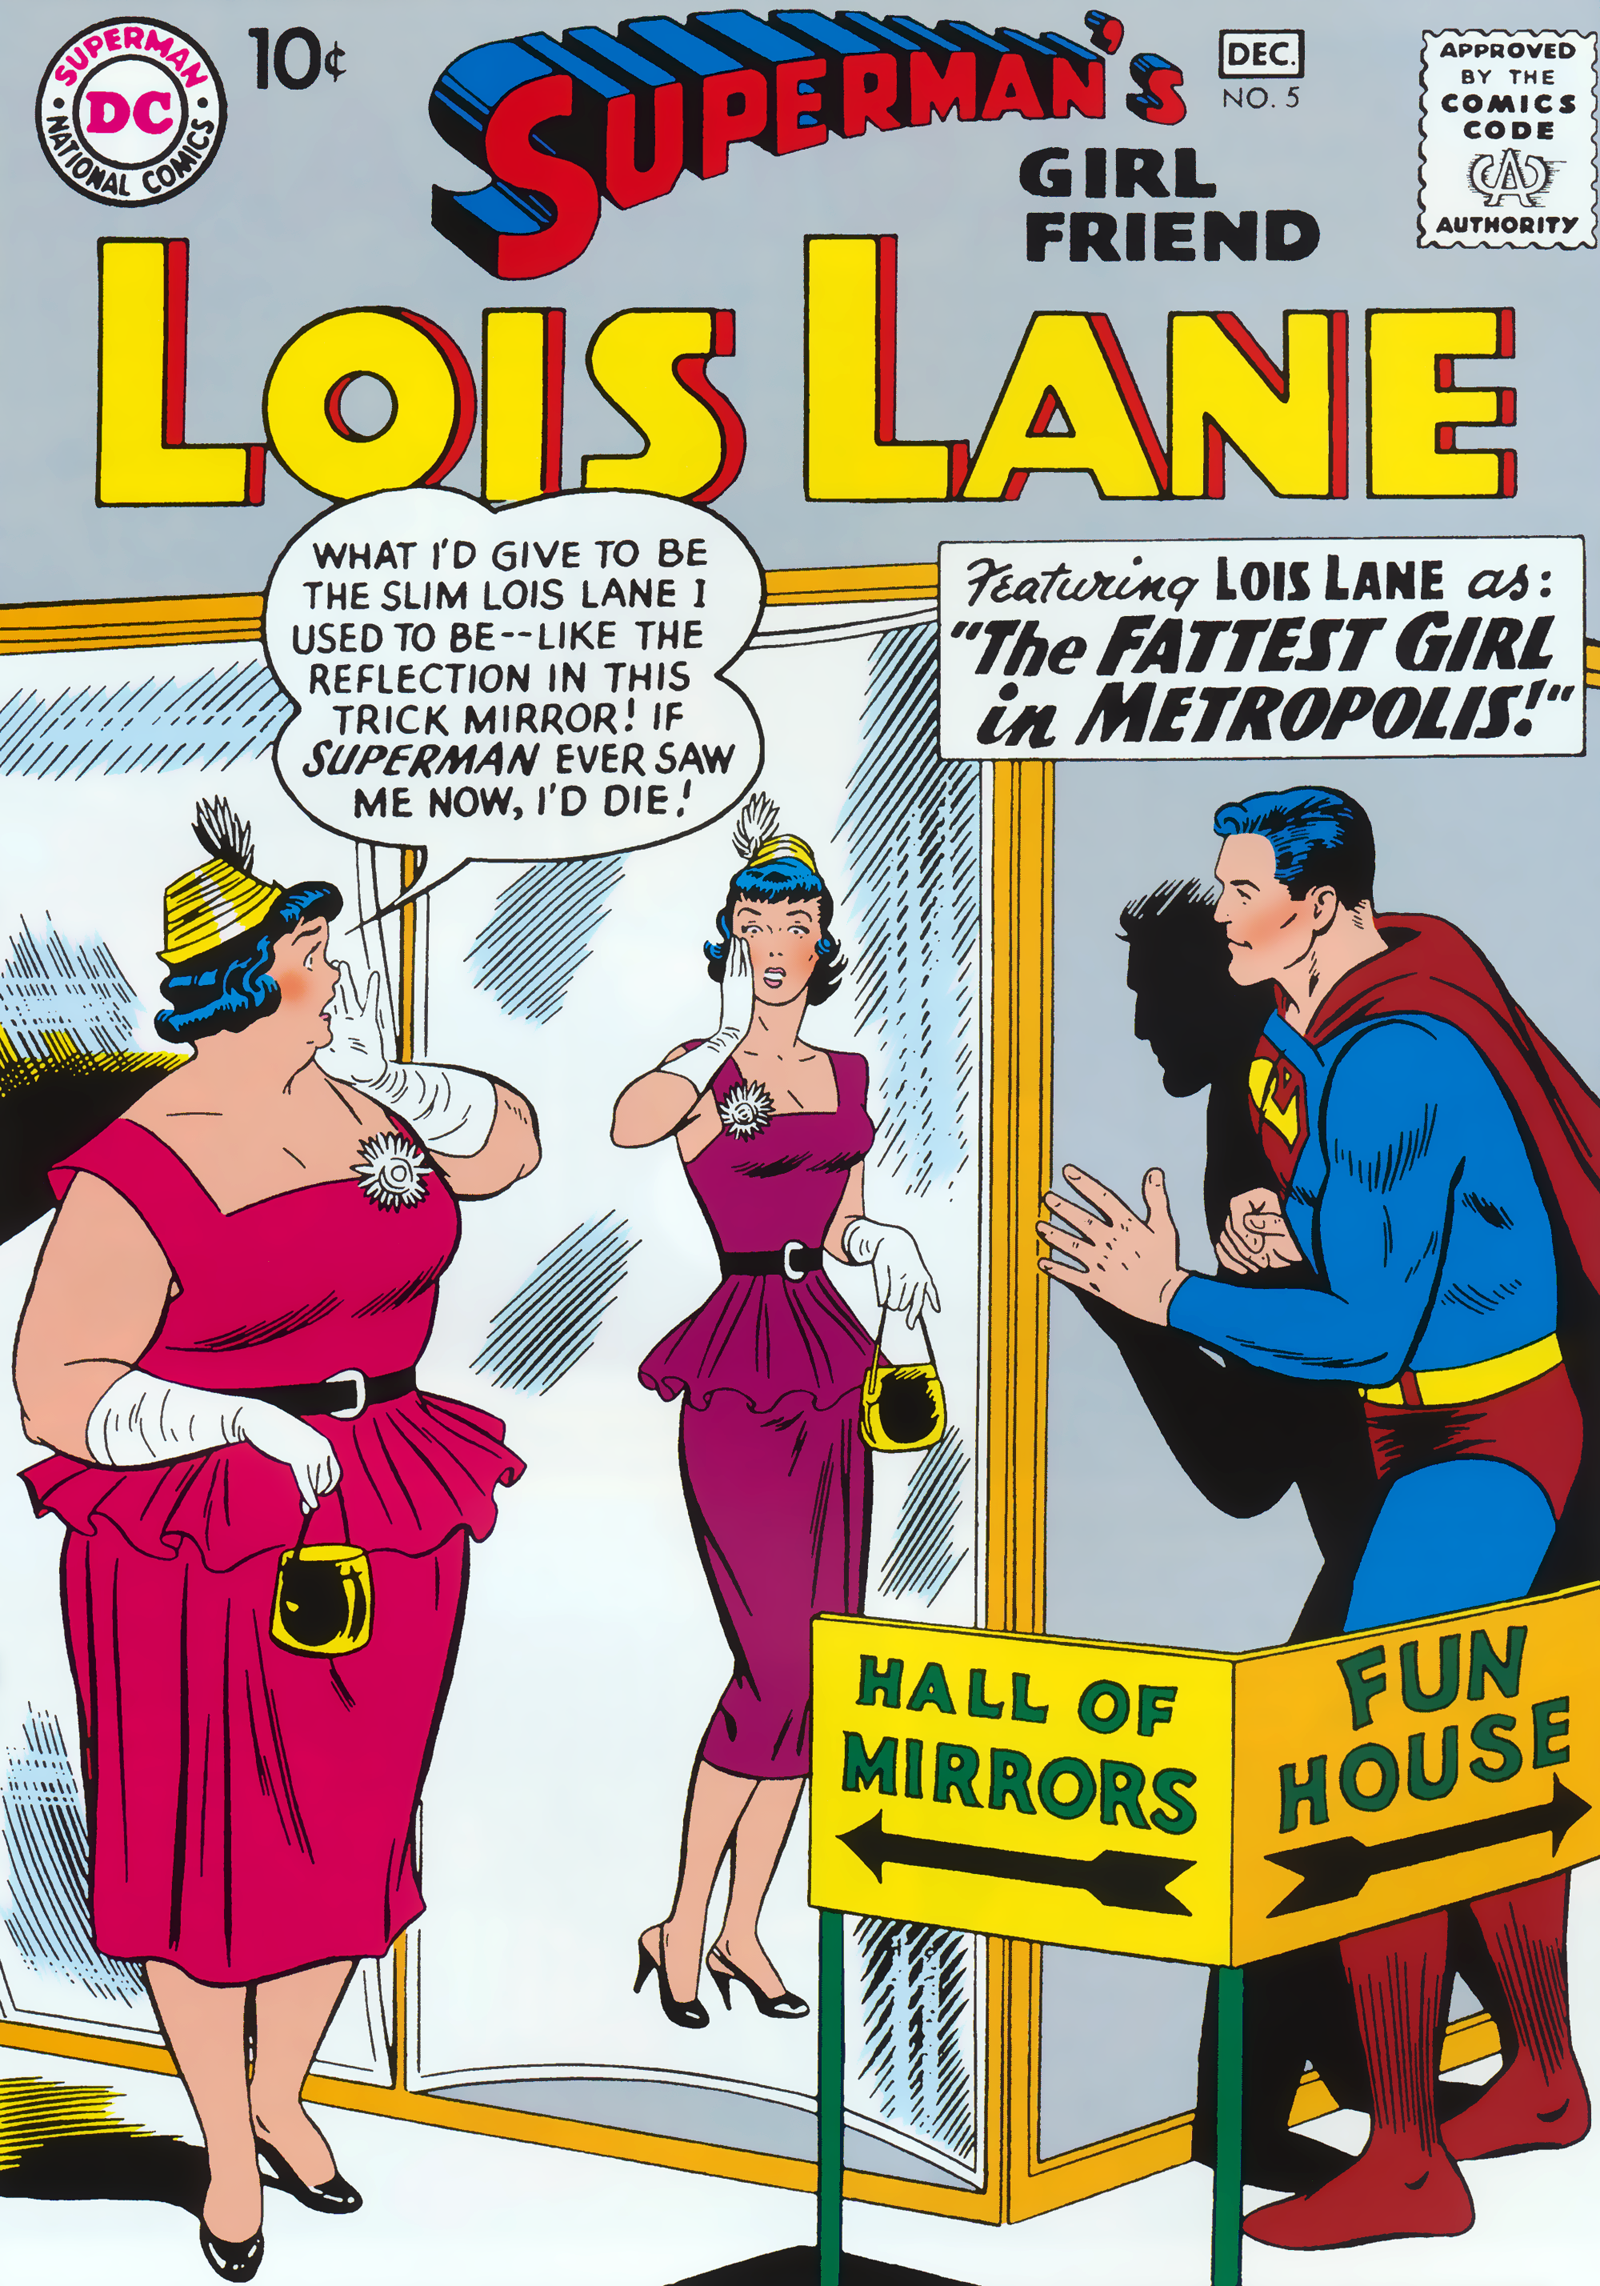 Superman and lois lane are taking a break . but not necessarily ending thei...